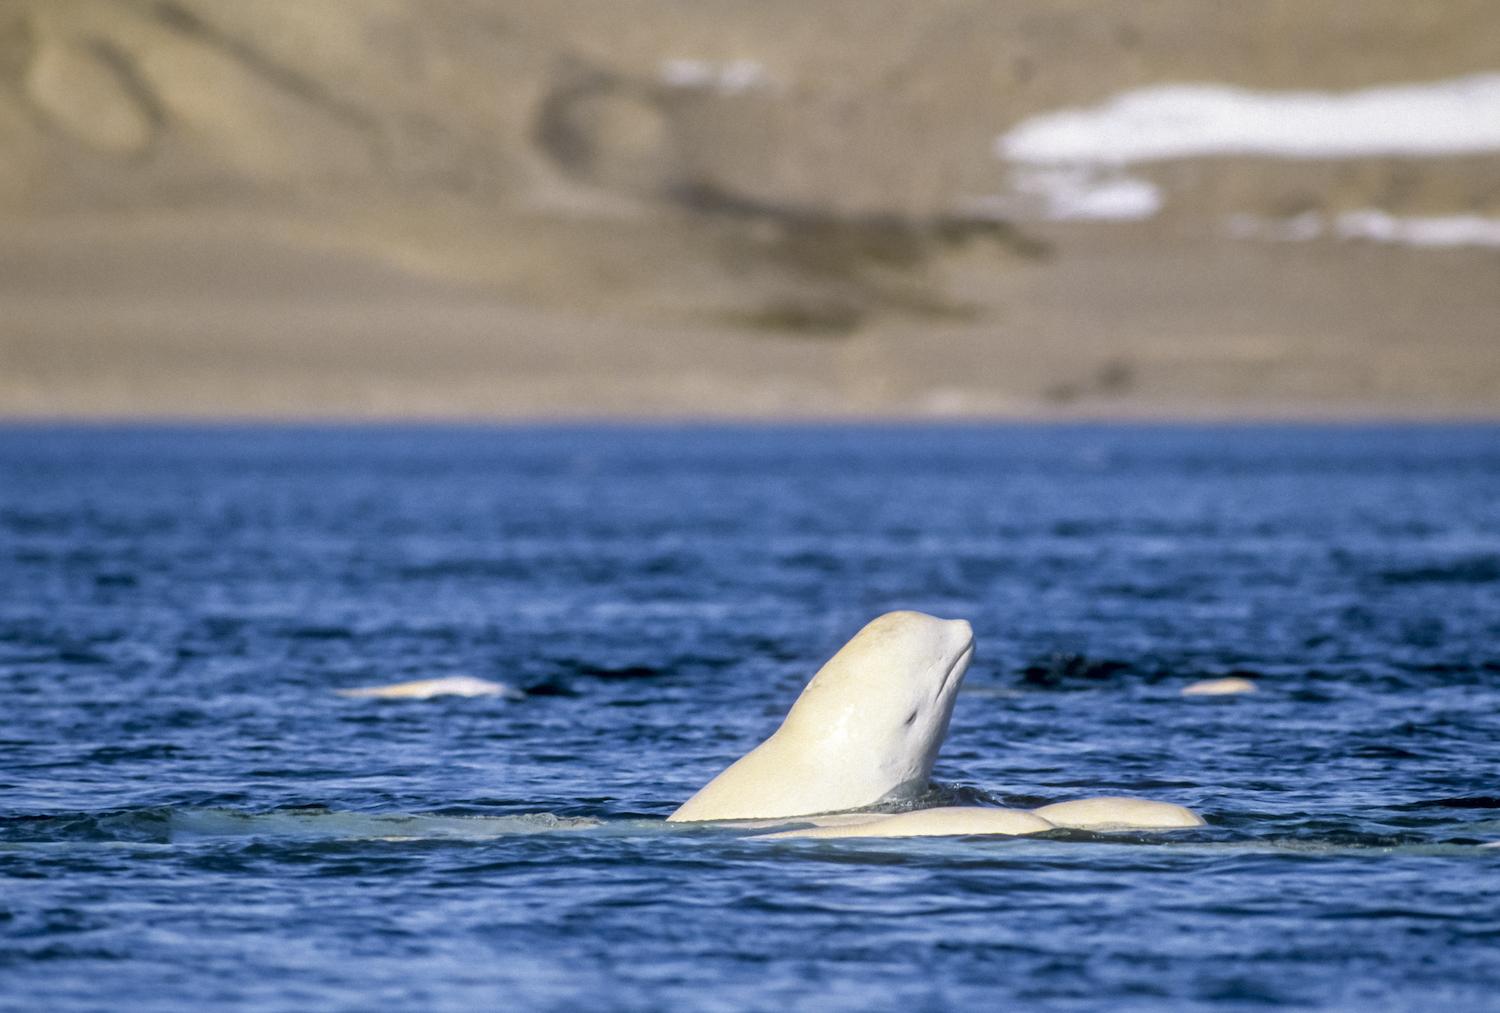 Boaters must stay at least 400 metres (1,312 feet) away from belugas in Saguenay-St. Lawrence Marine Park in Quebec.